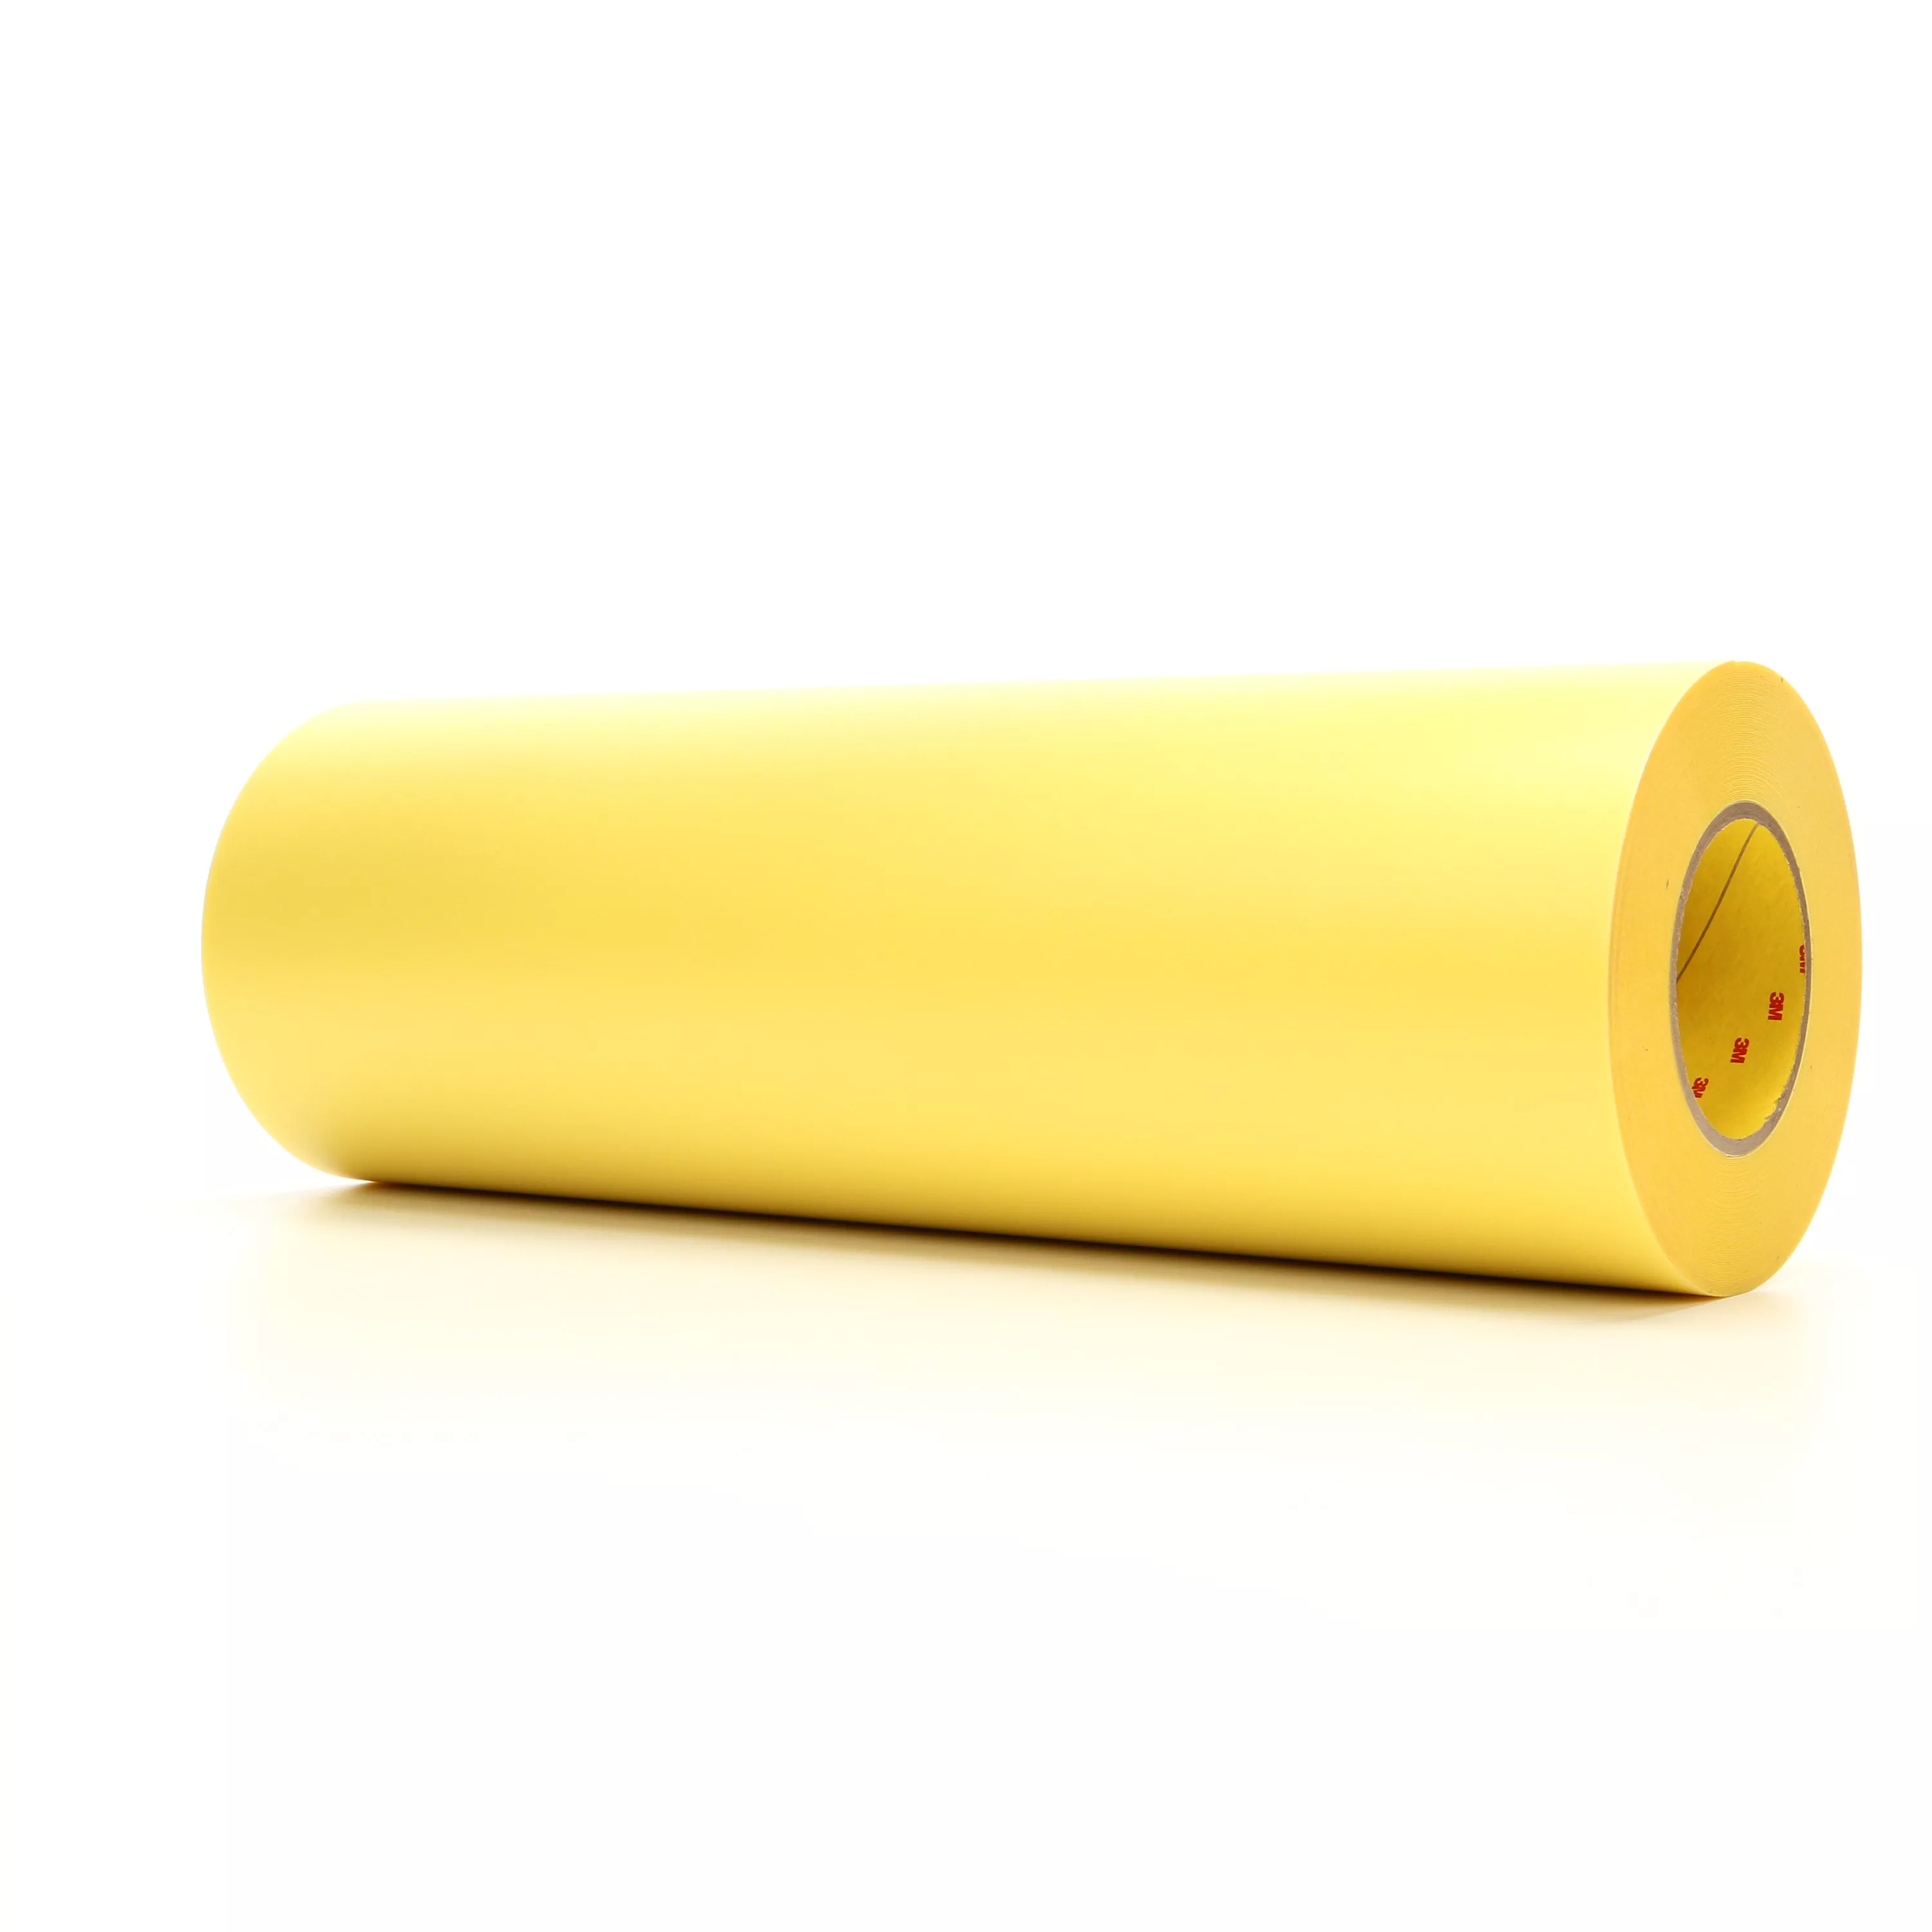 3M™ Cushion-Mount™ Plus Plate Mounting Tape E1315, Yellow, 457 mm x 33 m, 1 Roll/Case